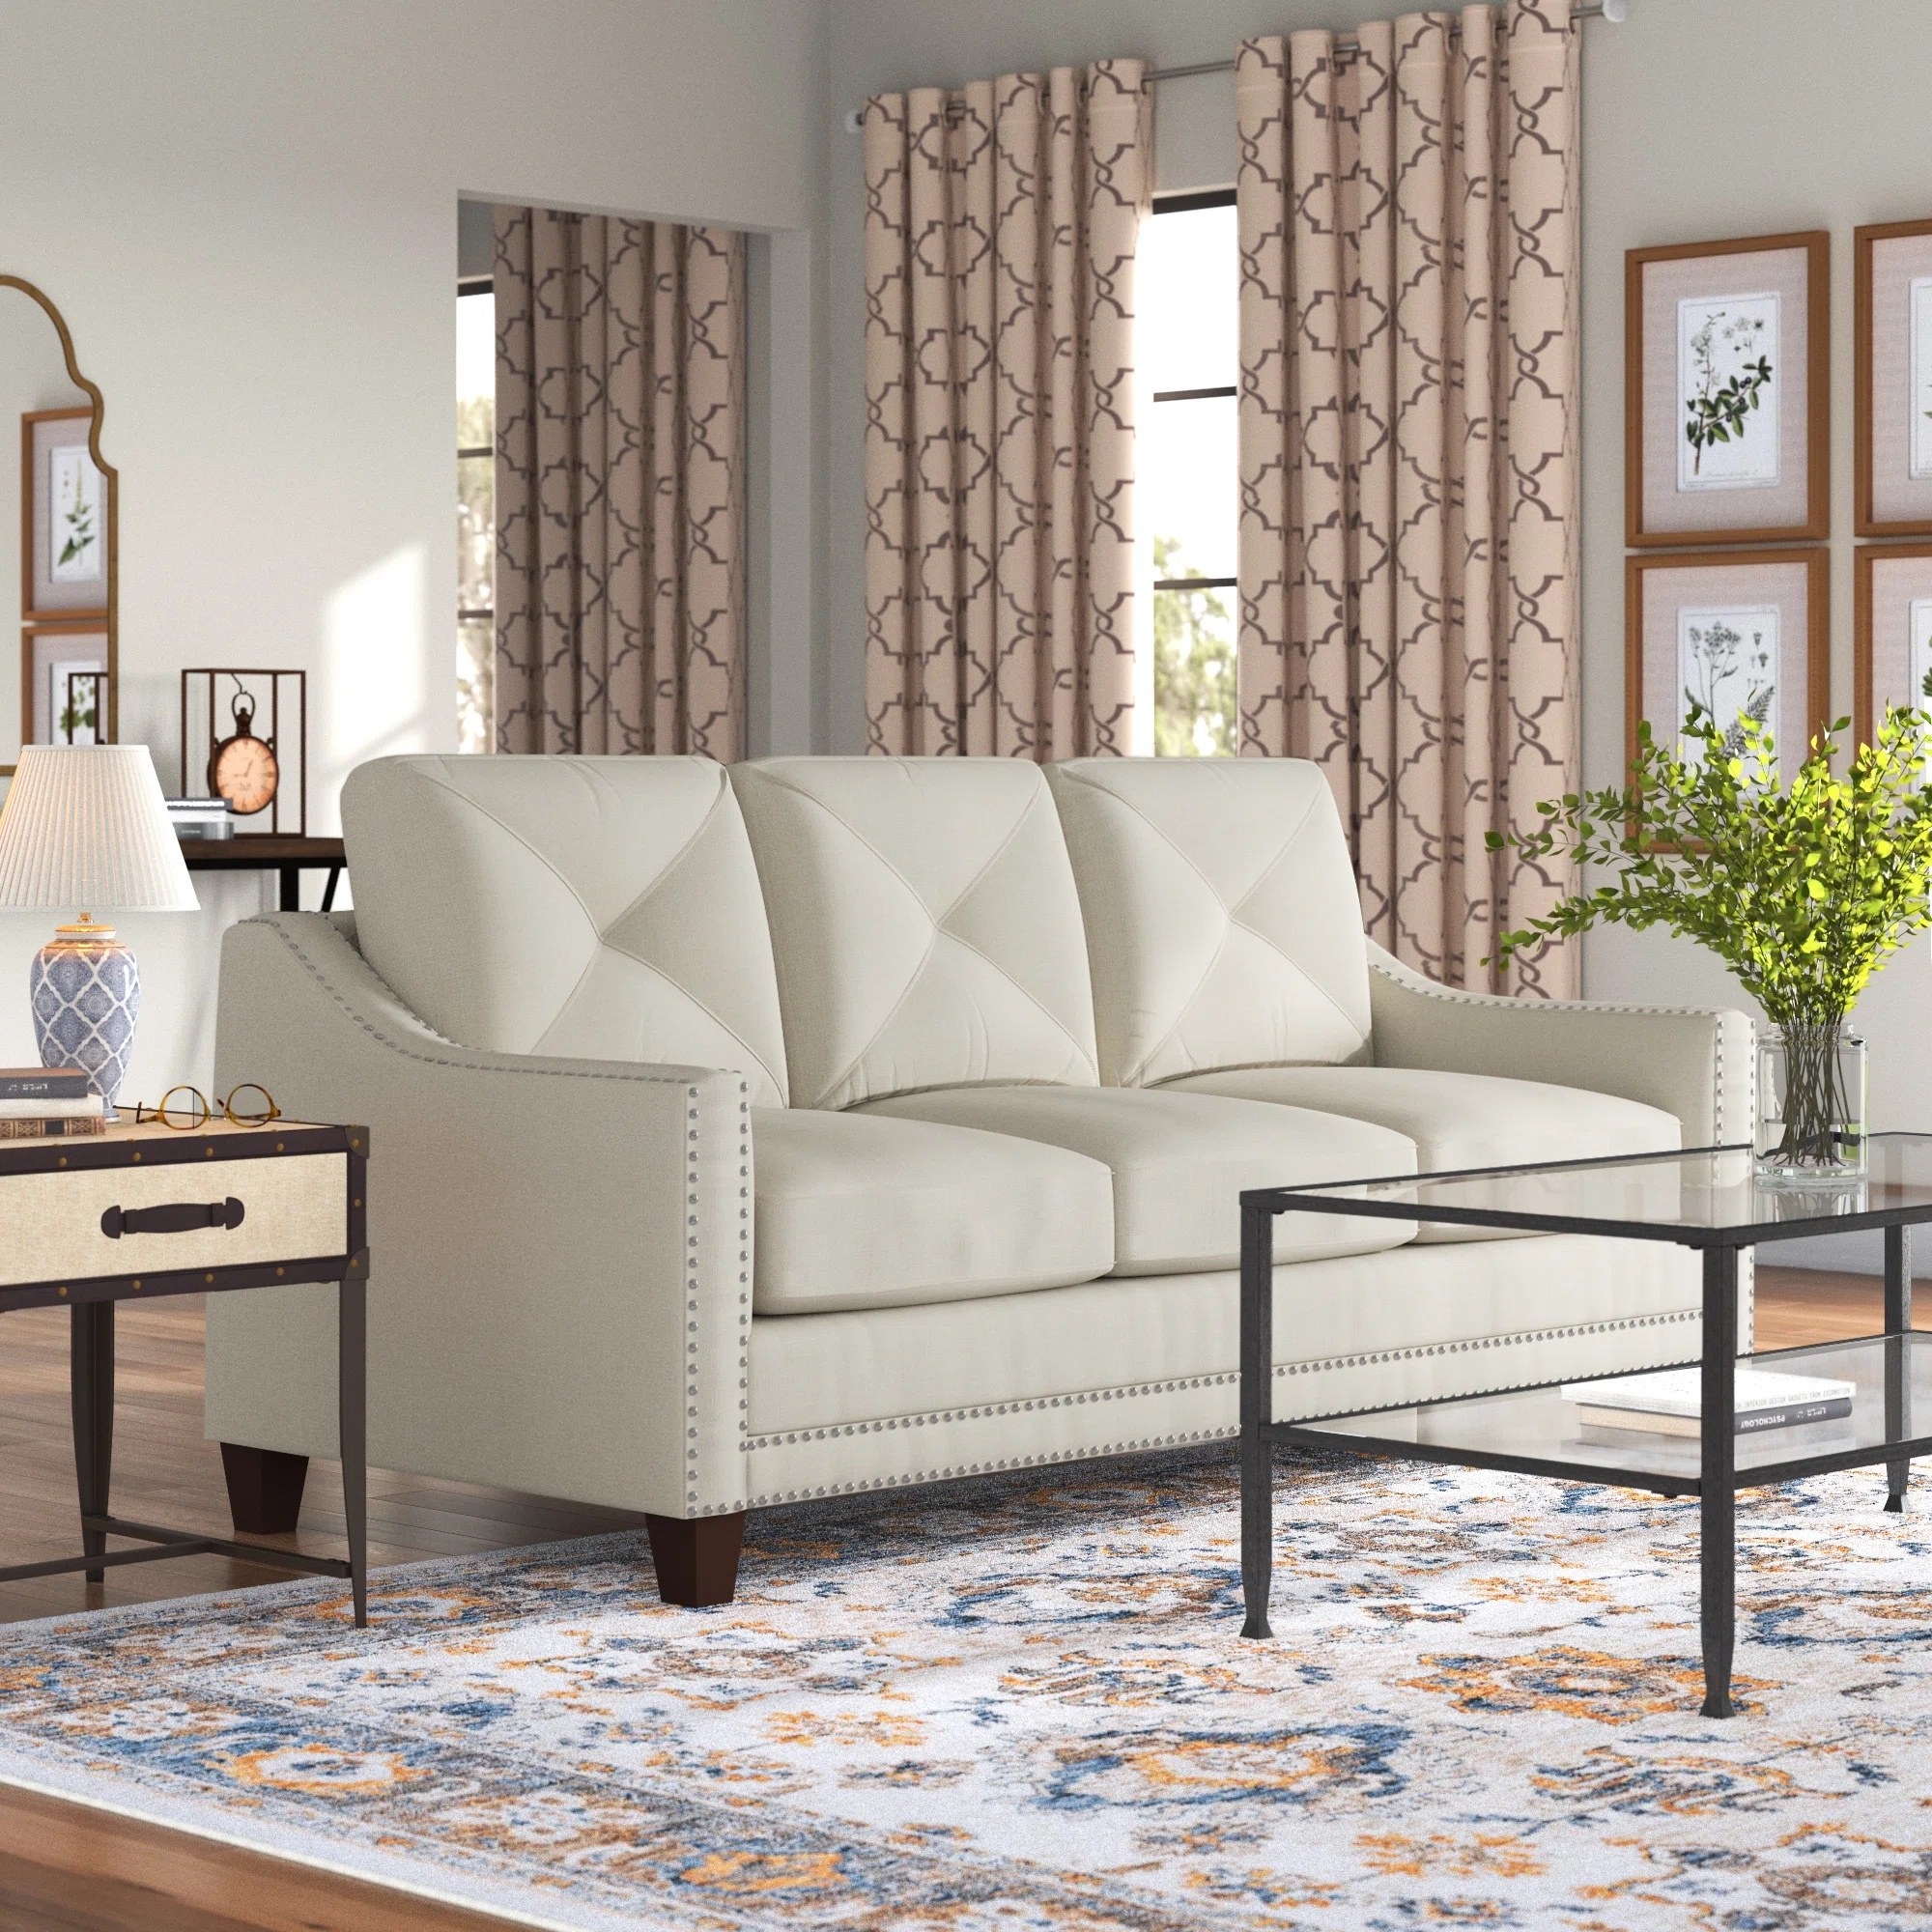 a taupe sofa with metal tufts in a cozy living room